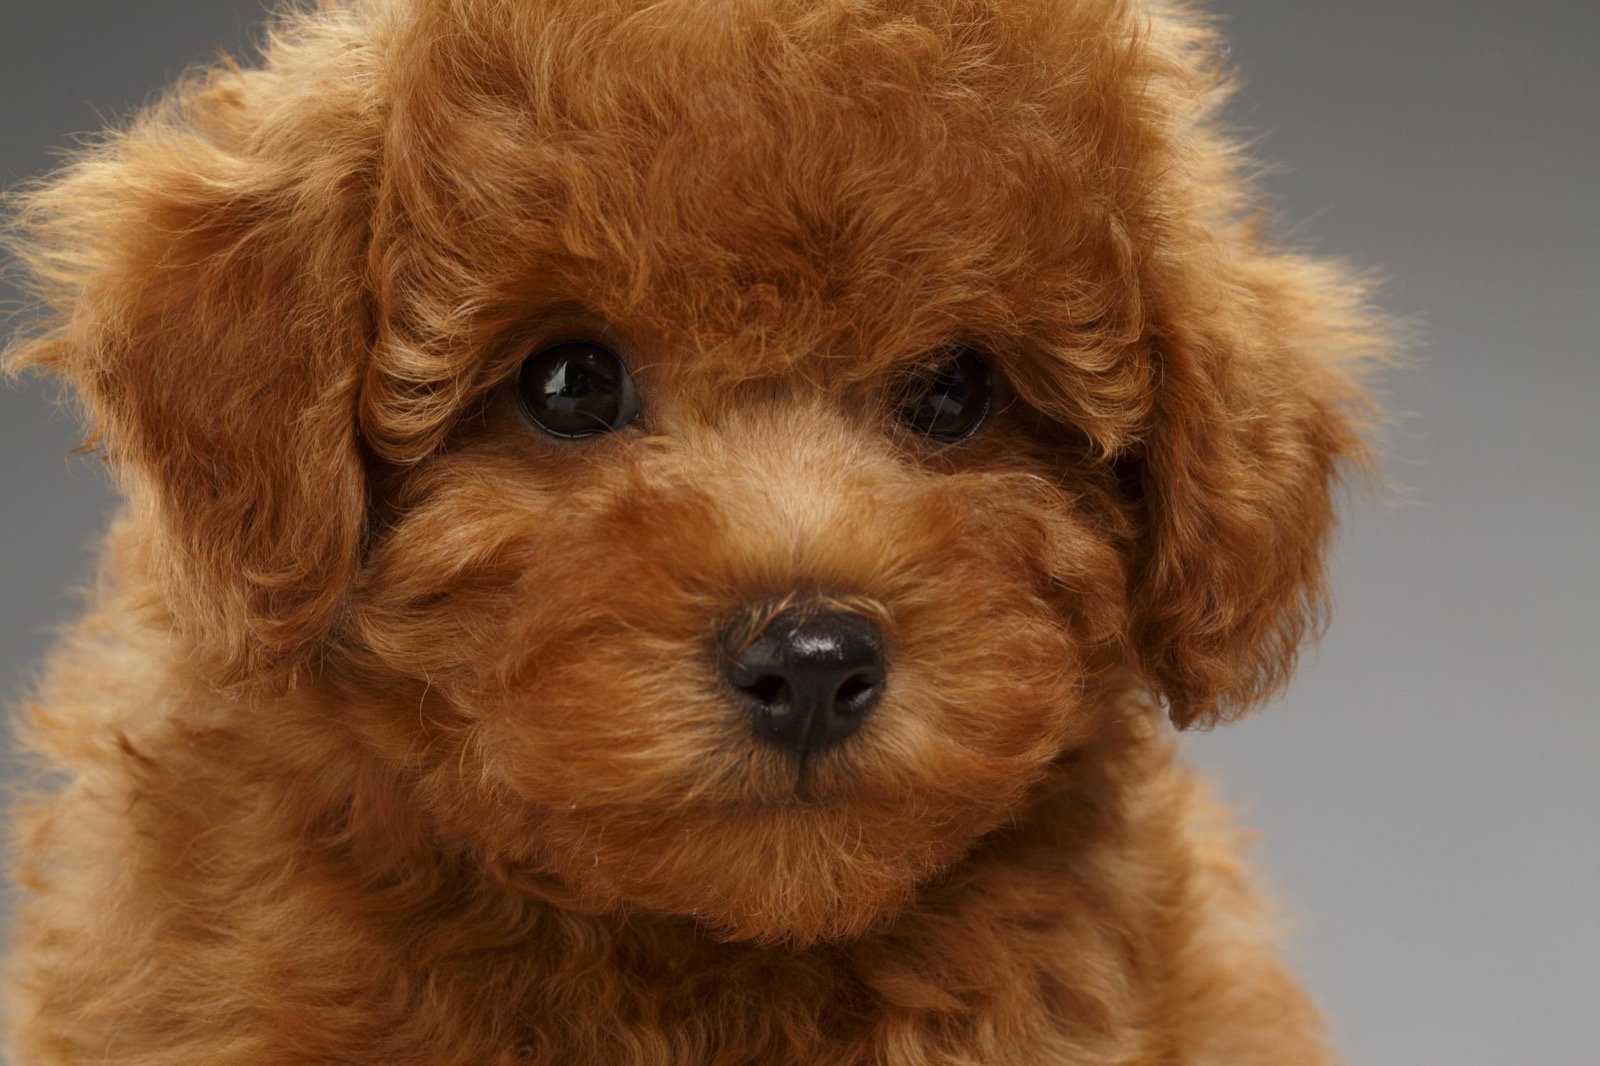 Can You Pass This General Knowledge Quiz While Being Distracted by Cute Puppies? Miniature Poodle Puppy